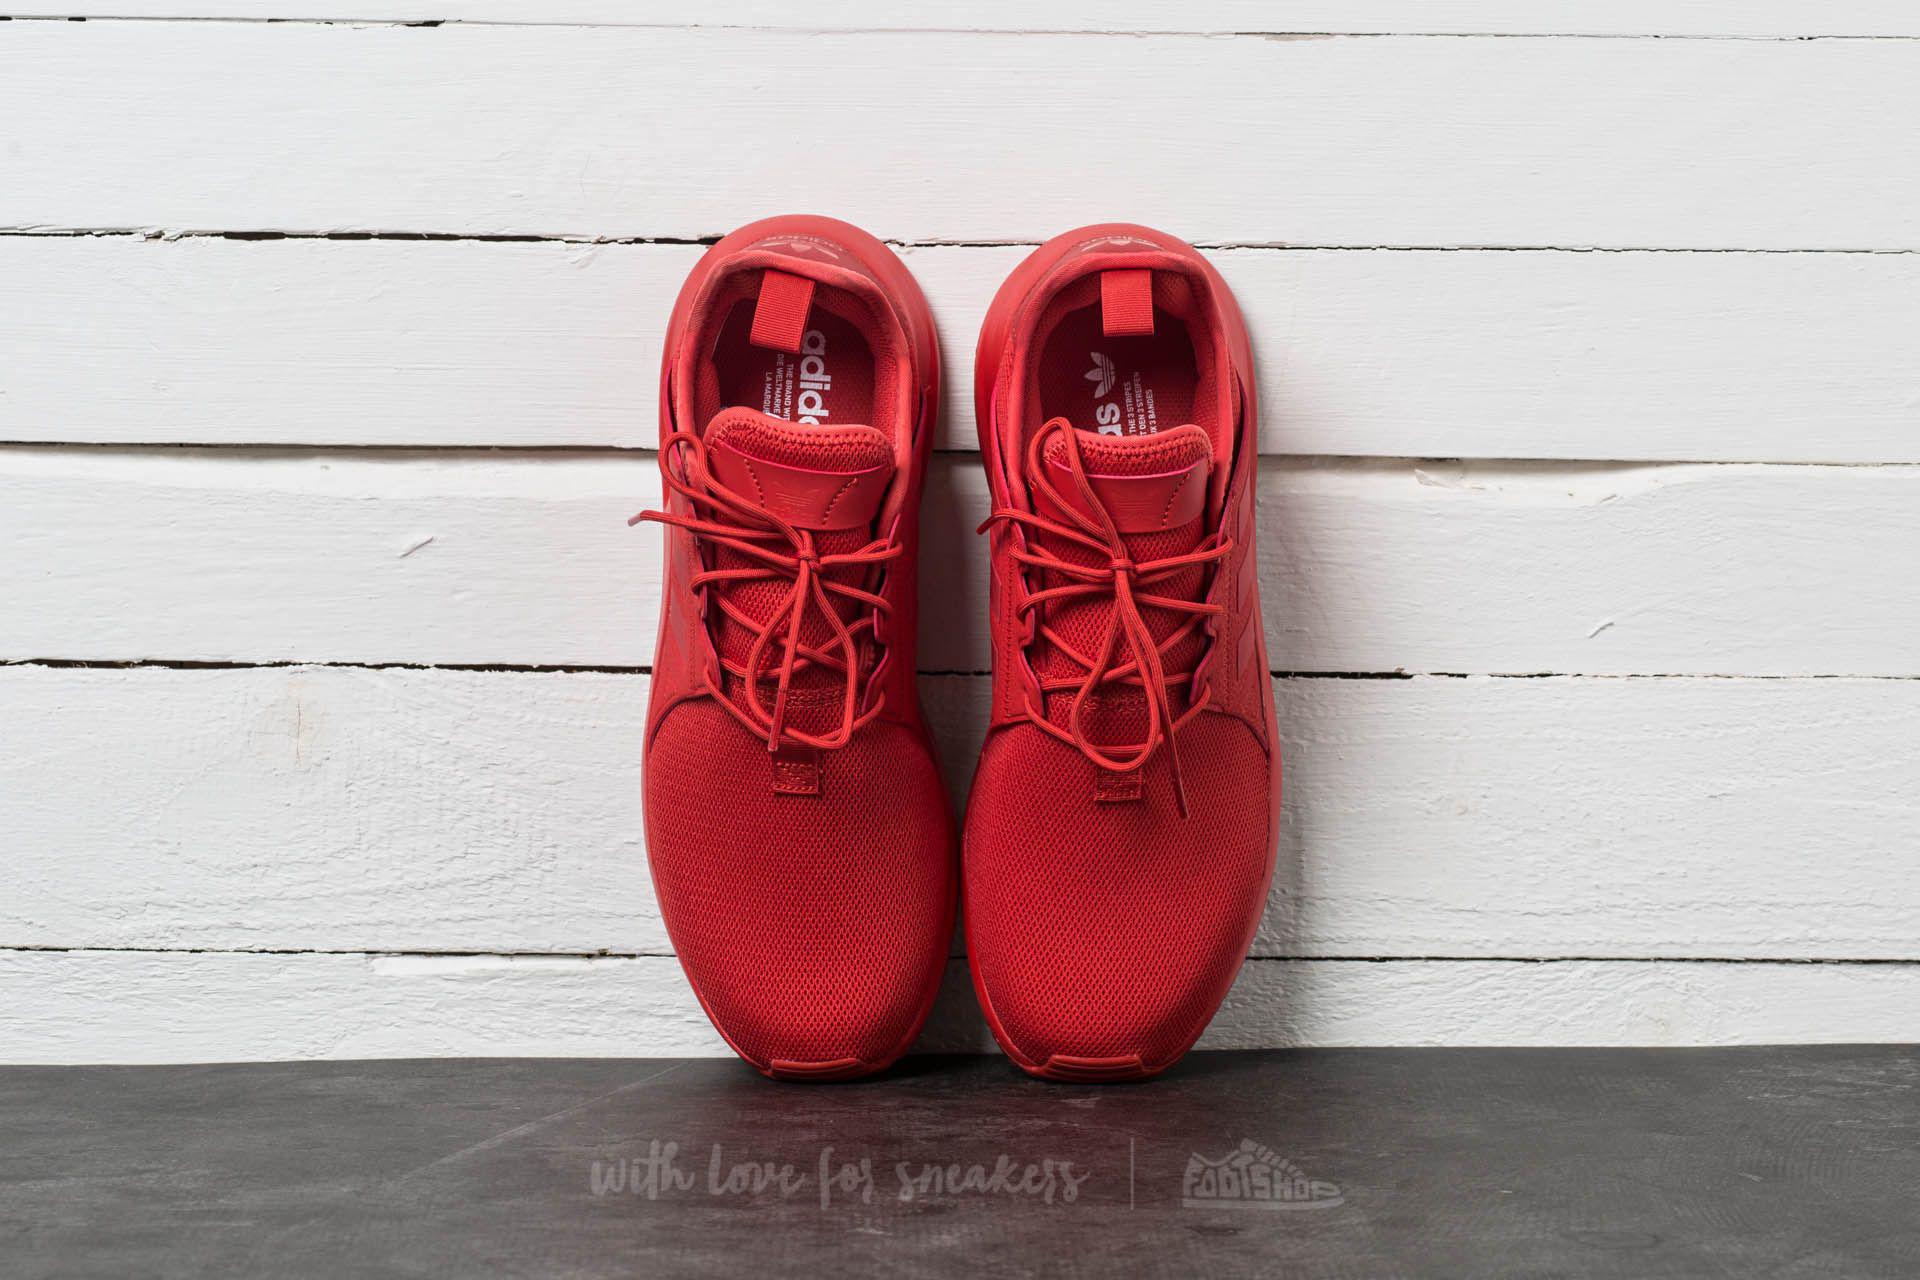 adidas x plr tactile red